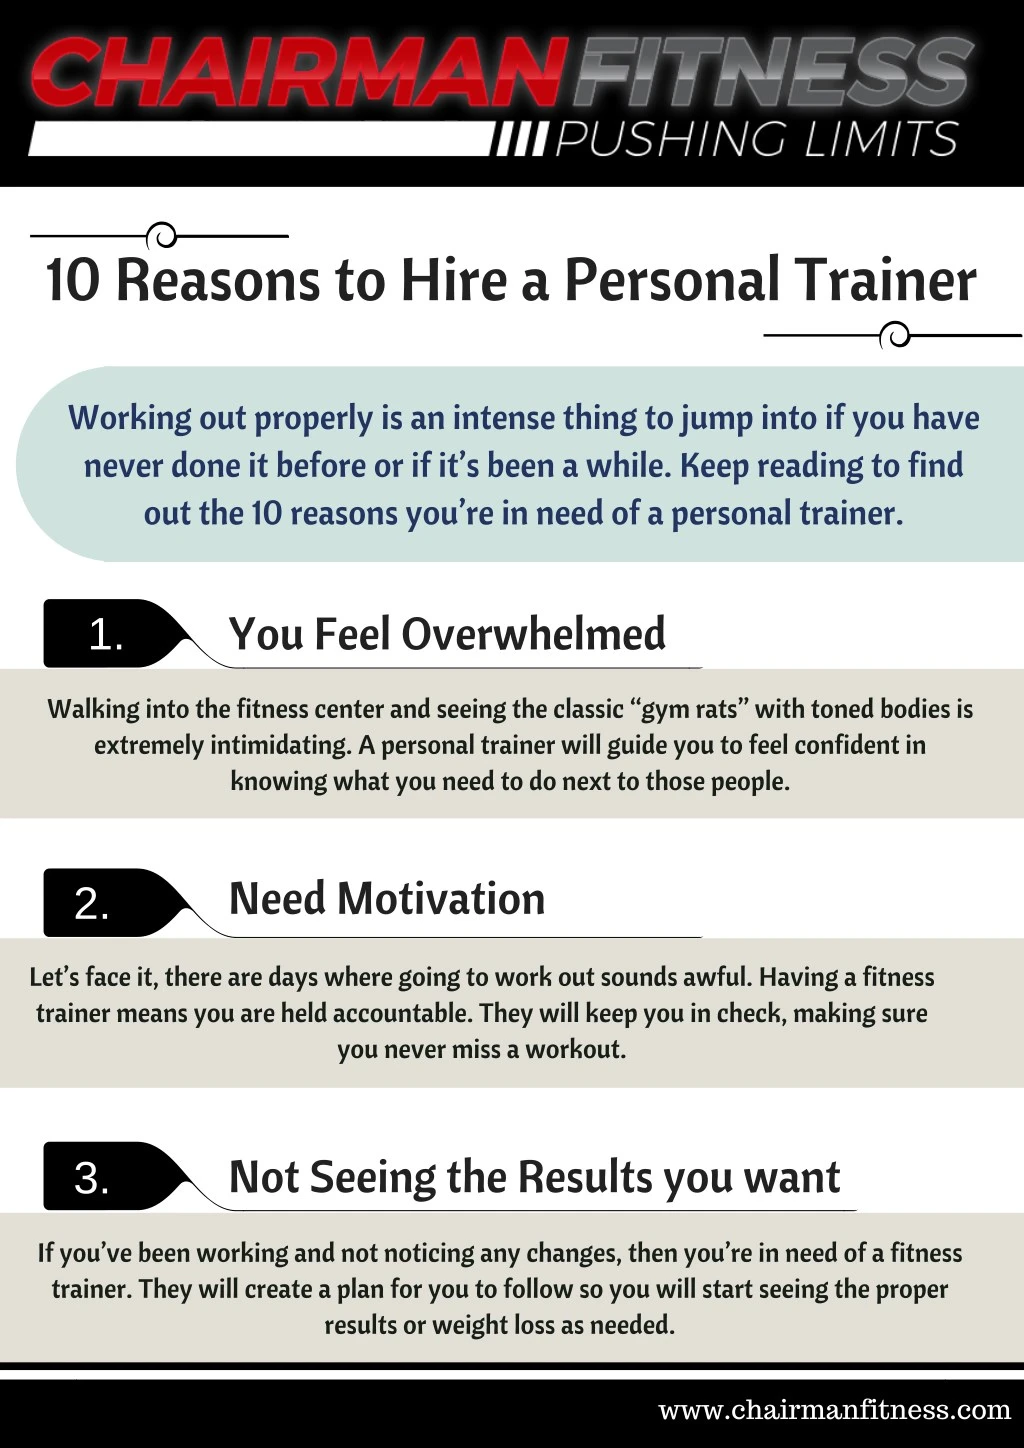 10 reasons to hire a personal trainer